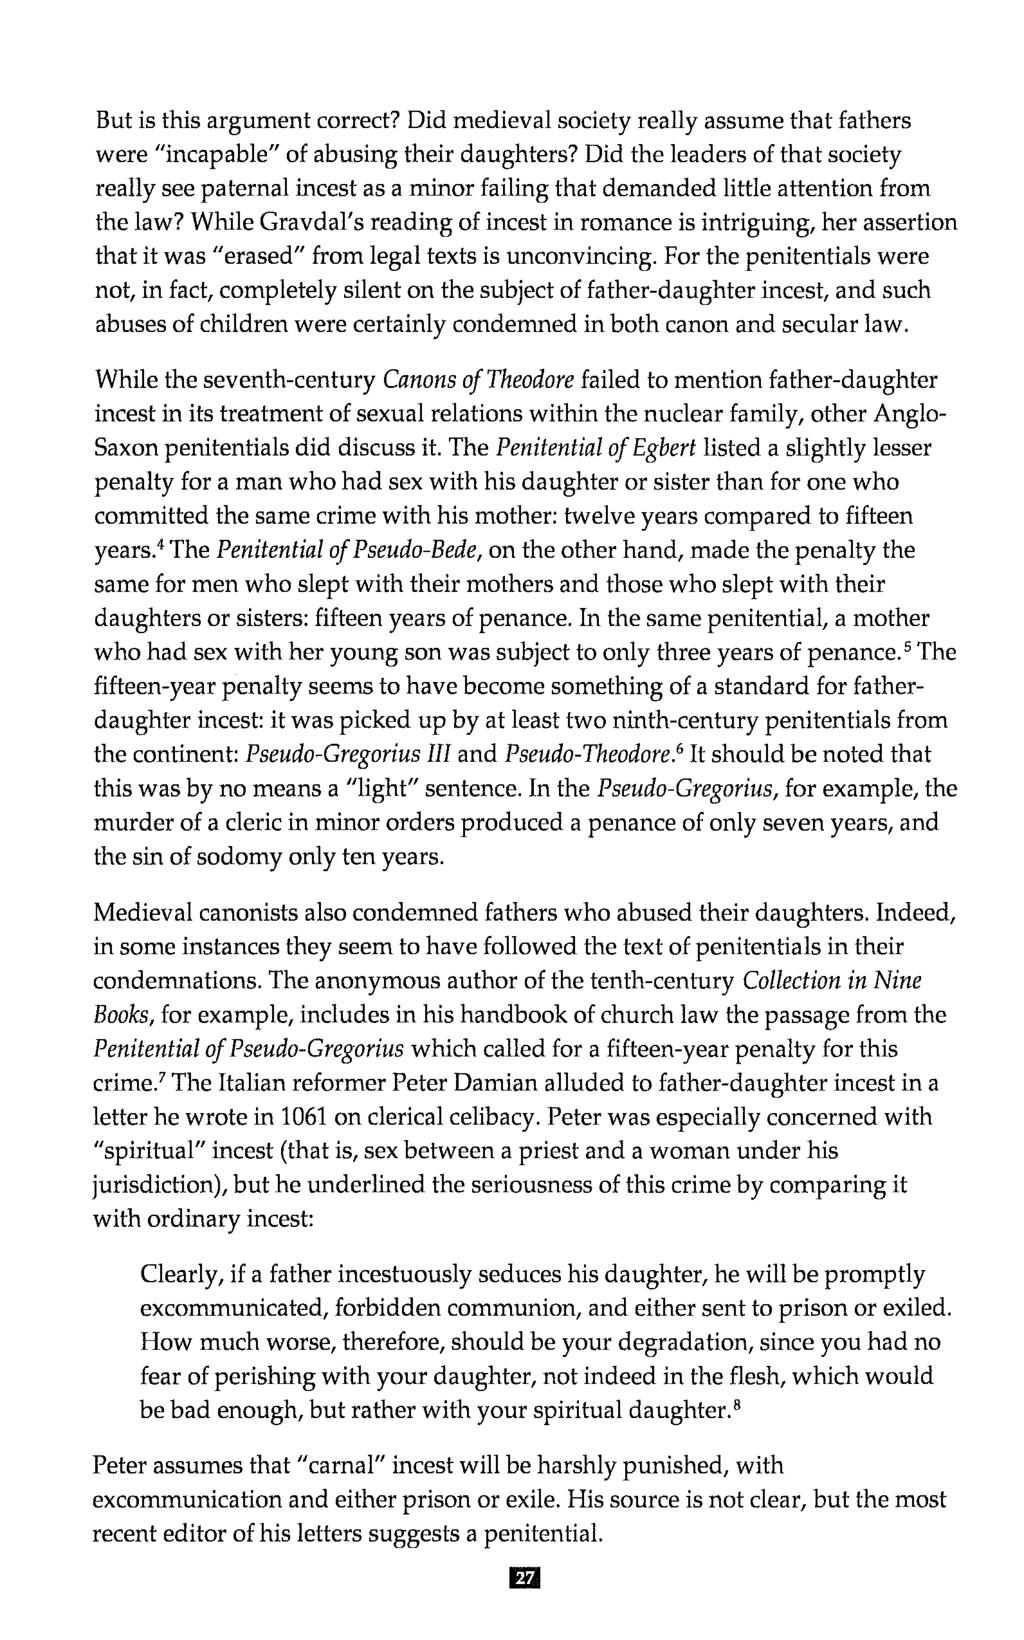 But is this arguent correct? Did edieval society really assue that fathers were "incapable" of abusing their daughters?